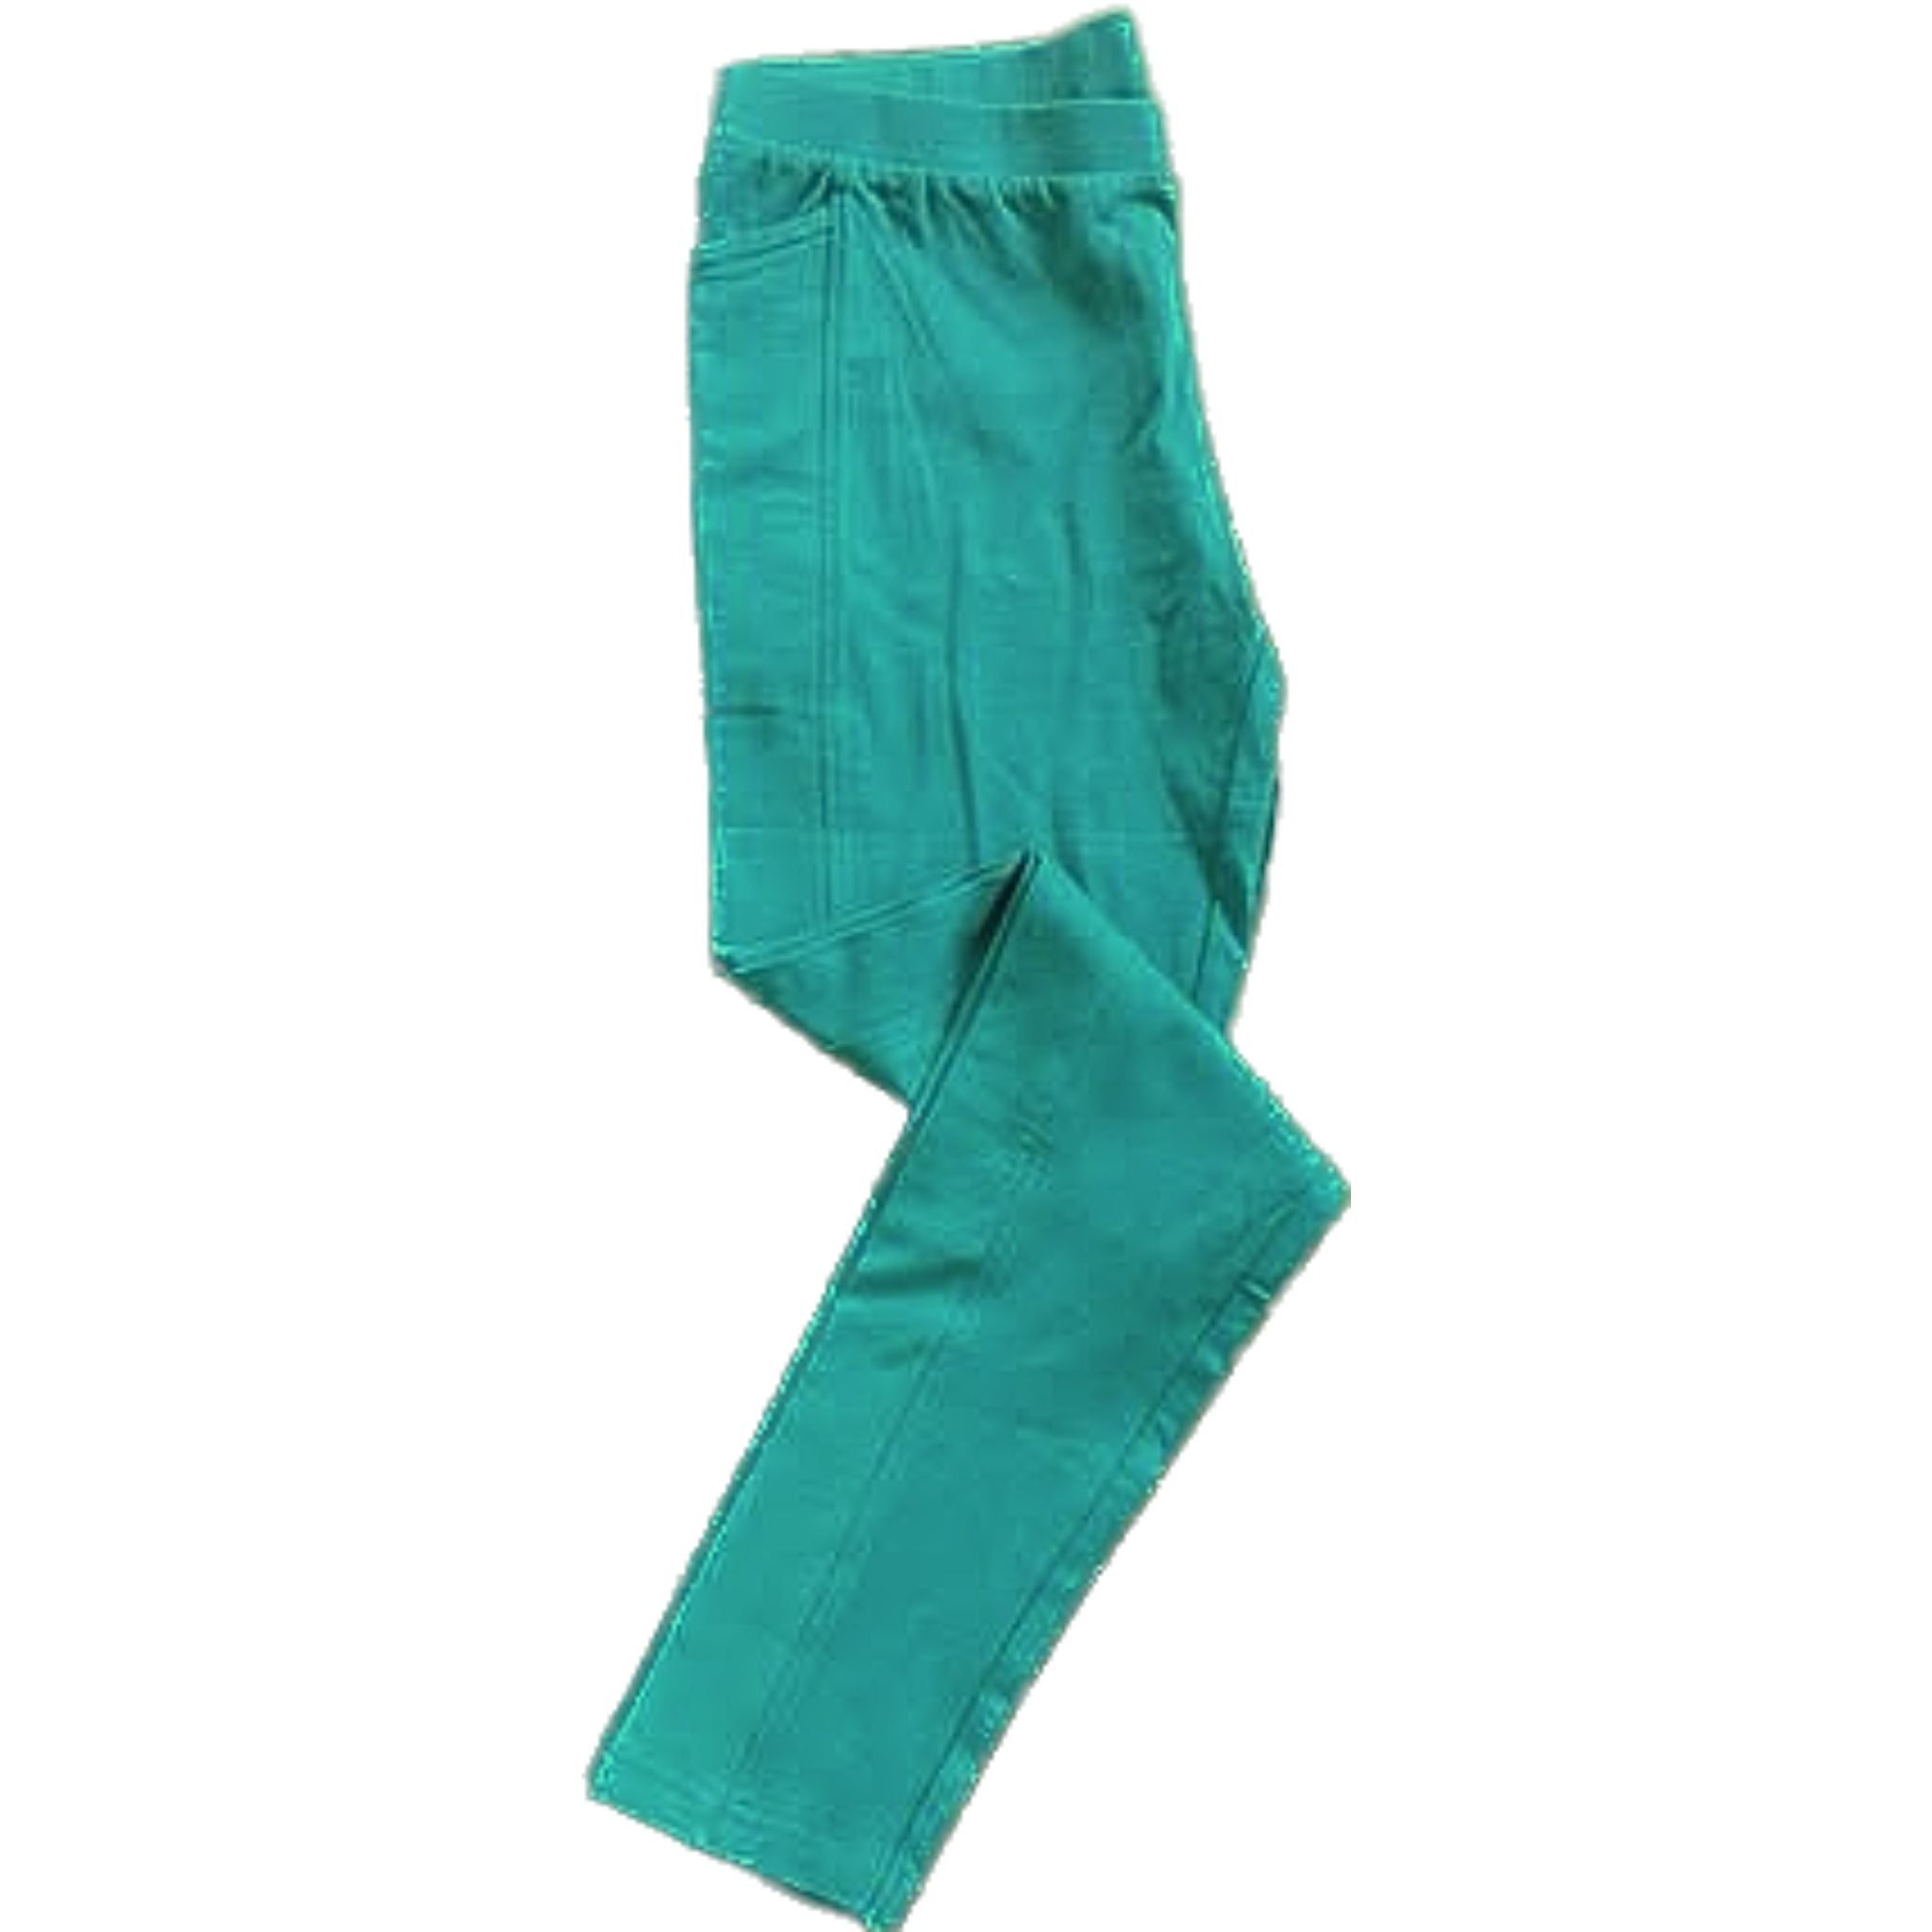 Ivy Green Kids Leggings with Pockets